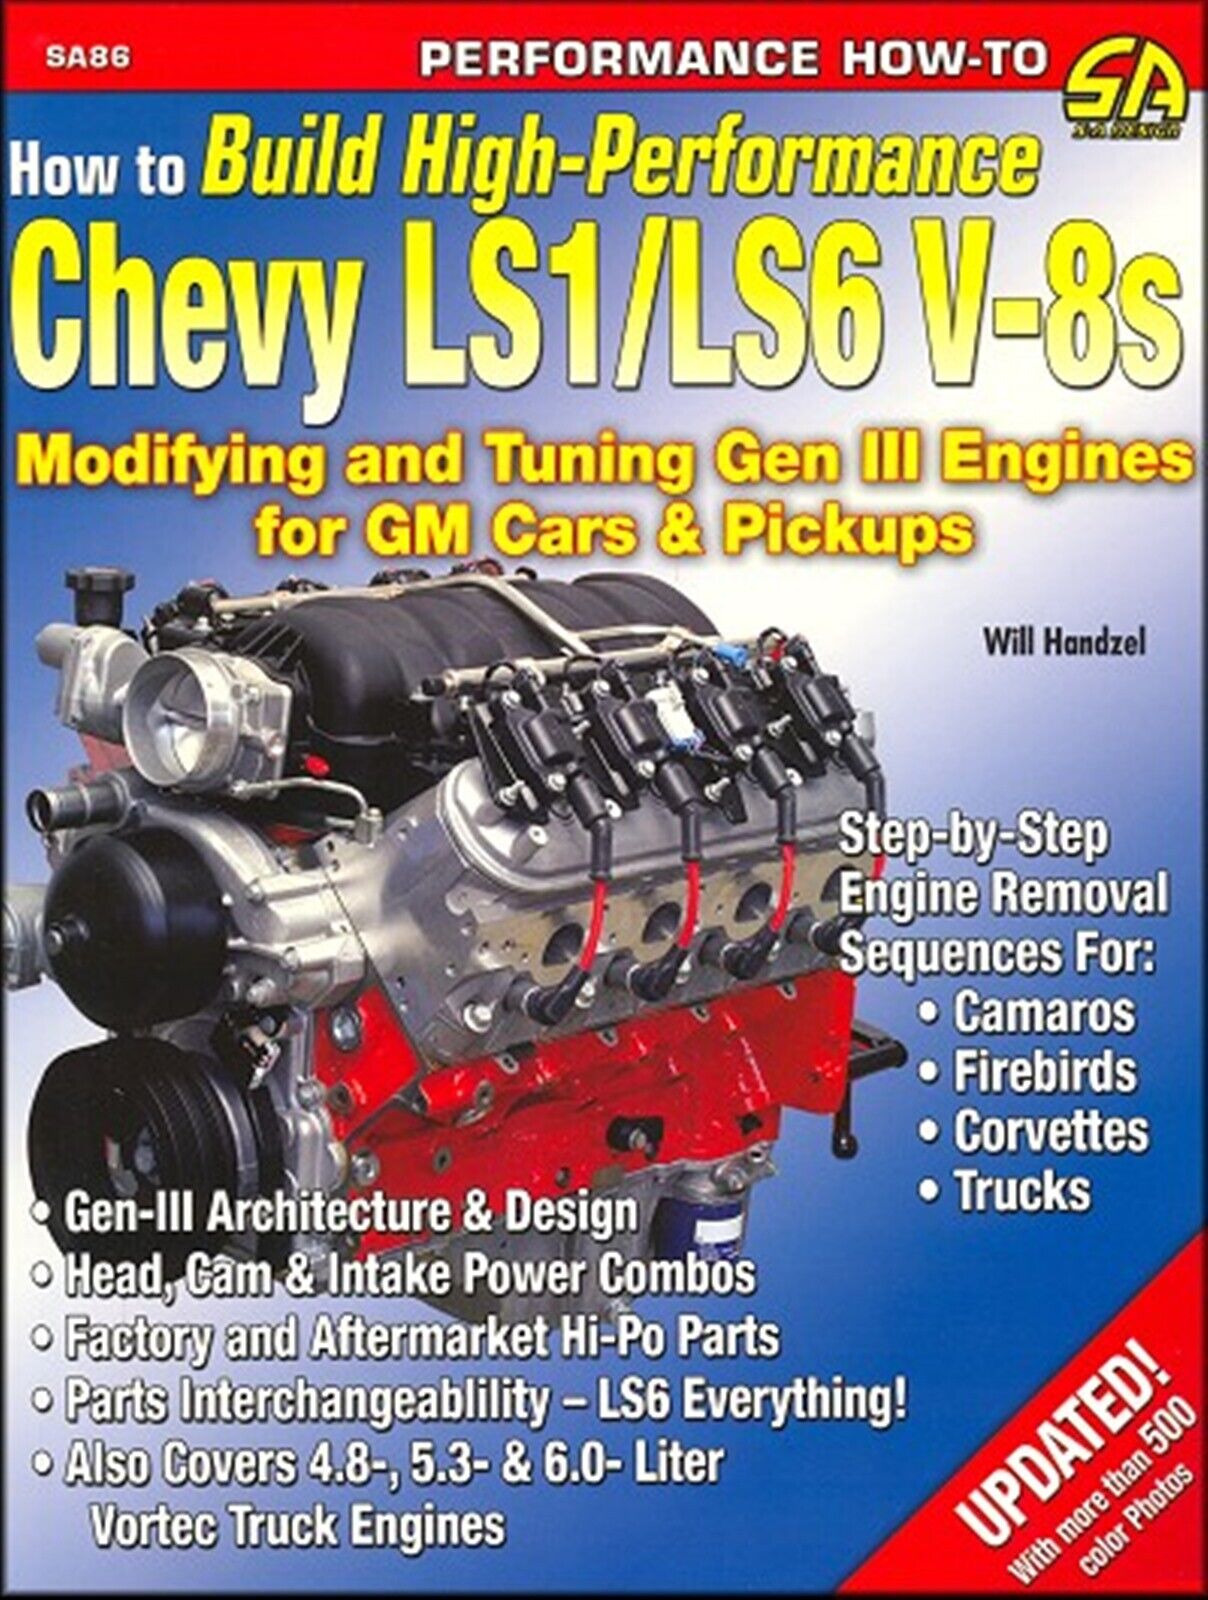 How To Build High-Performance Chevy LS1/LS6 V-8s: Modifying Gen III GM Engines